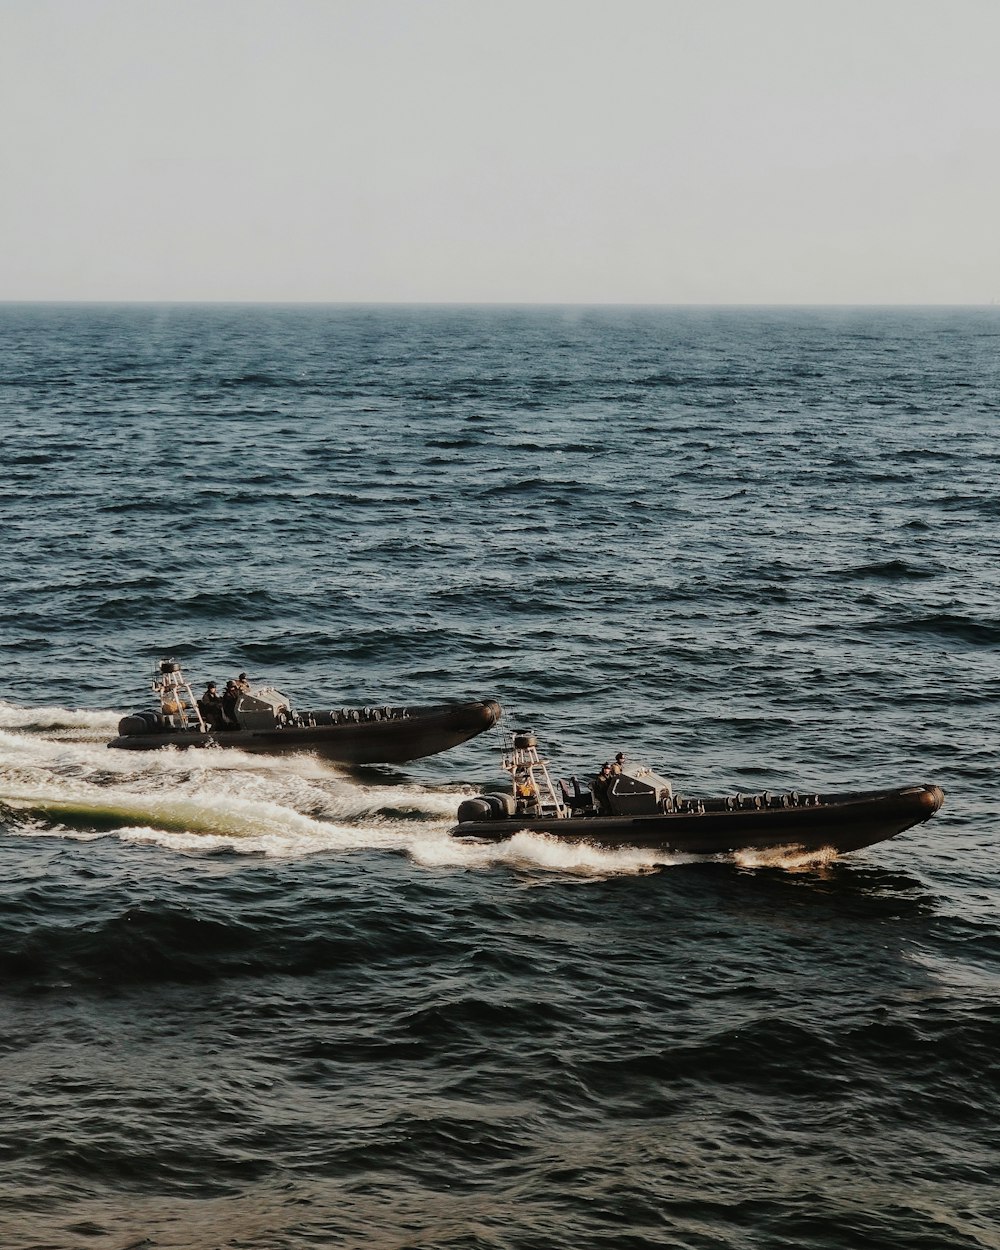 people riding on white and black boat on sea during daytime